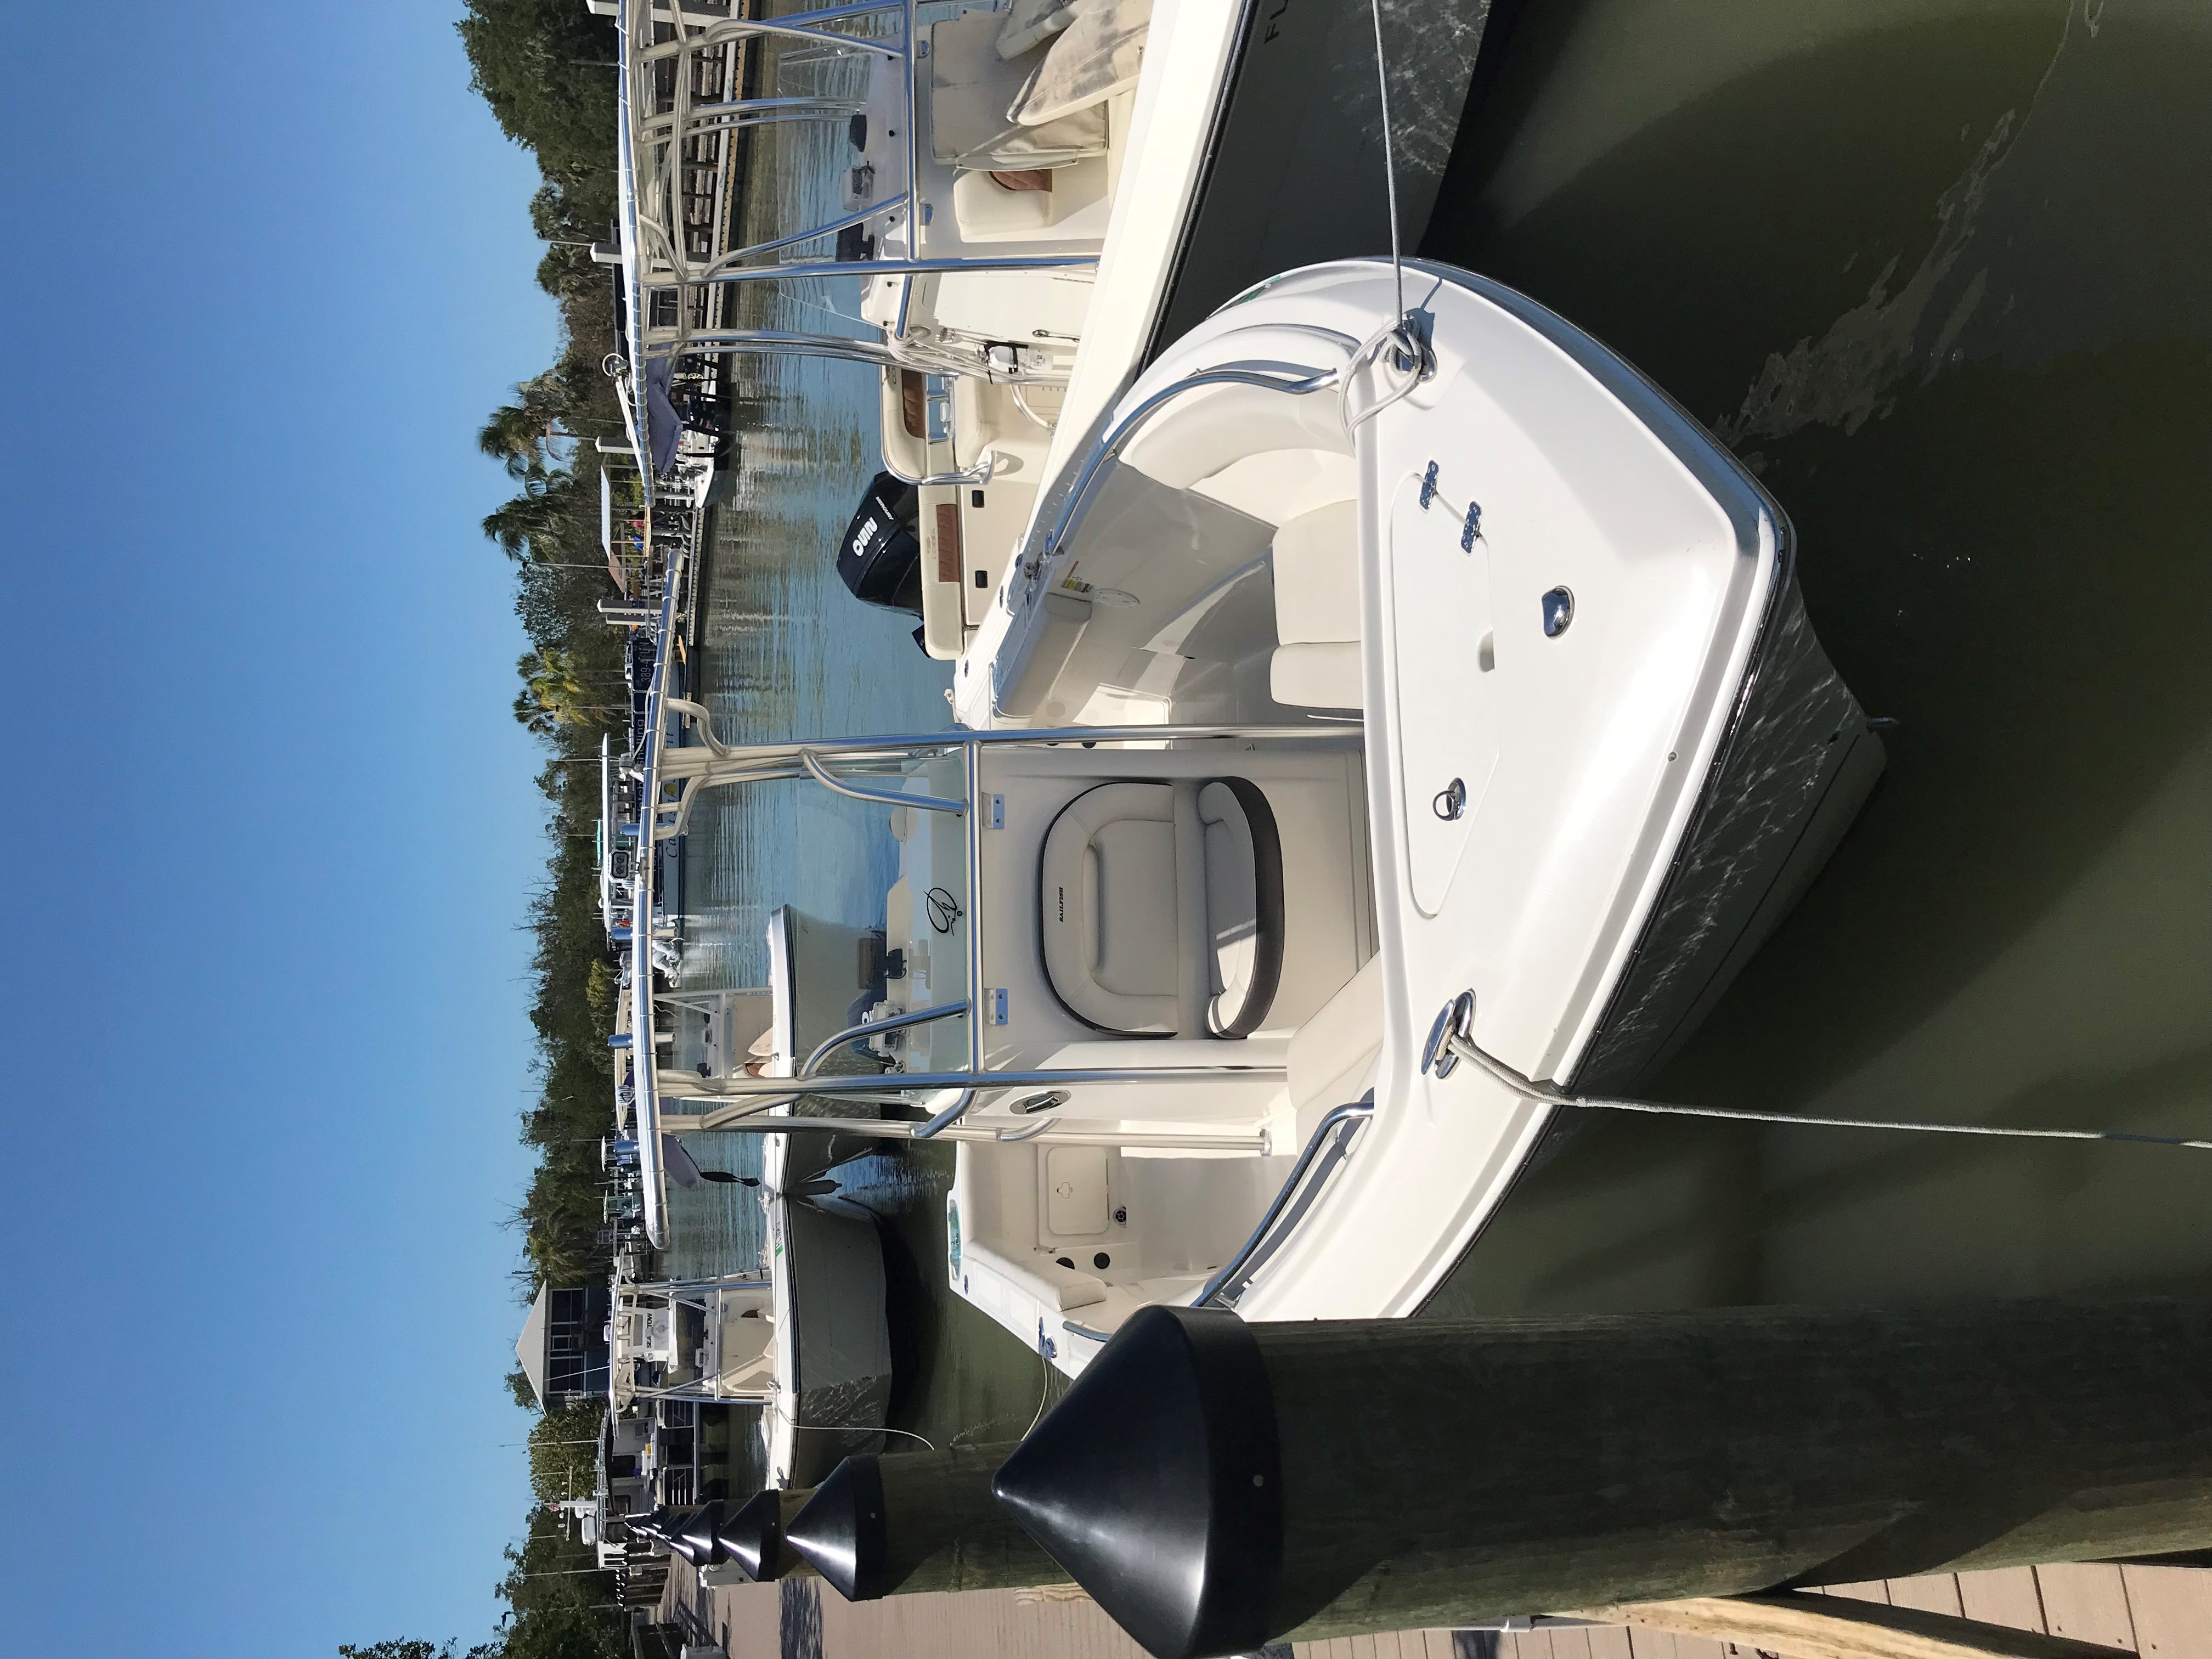 THE JOLLY JENSEN (24' Offshore Center Console 250HP - fishing)